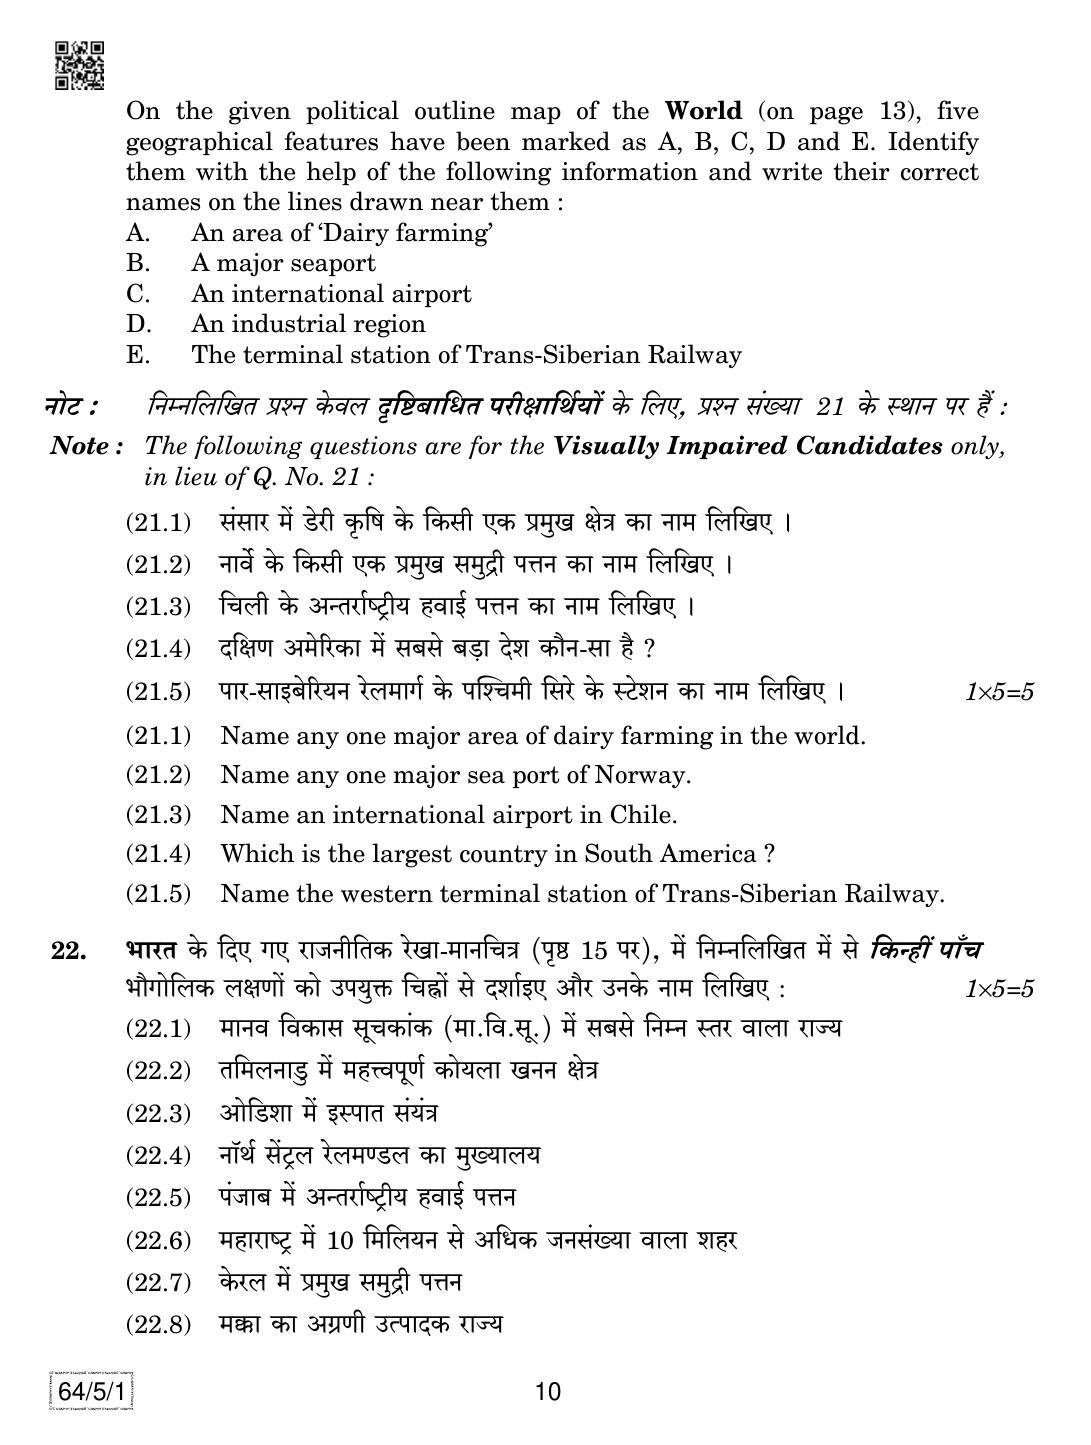 CBSE Class 12 64-5-1 Geography 2019 Question Paper - Page 10